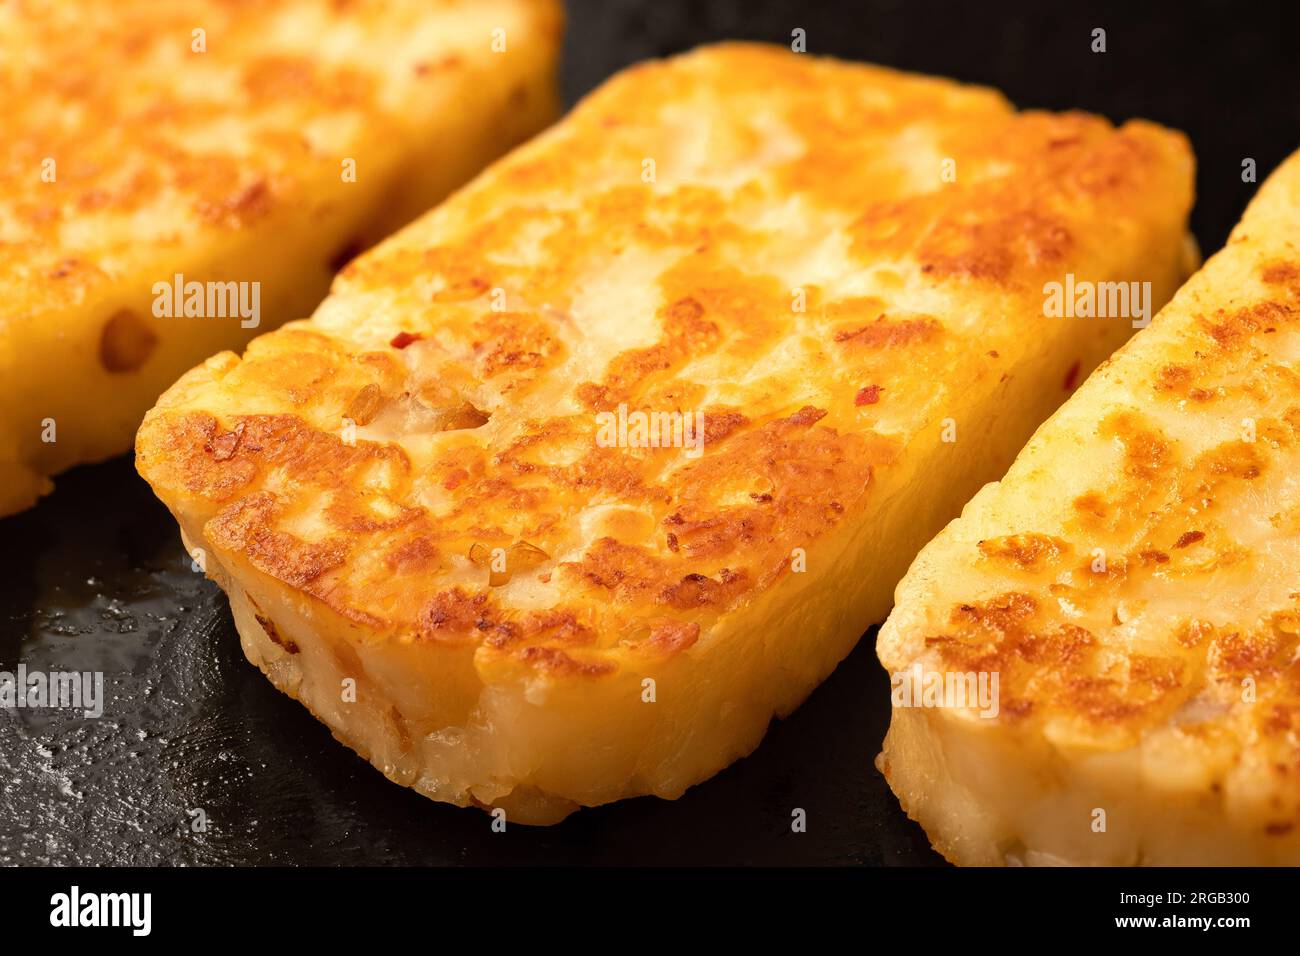 Detail of fried slices of halloumi cheese with red chilli on black frying pan. Stock Photo